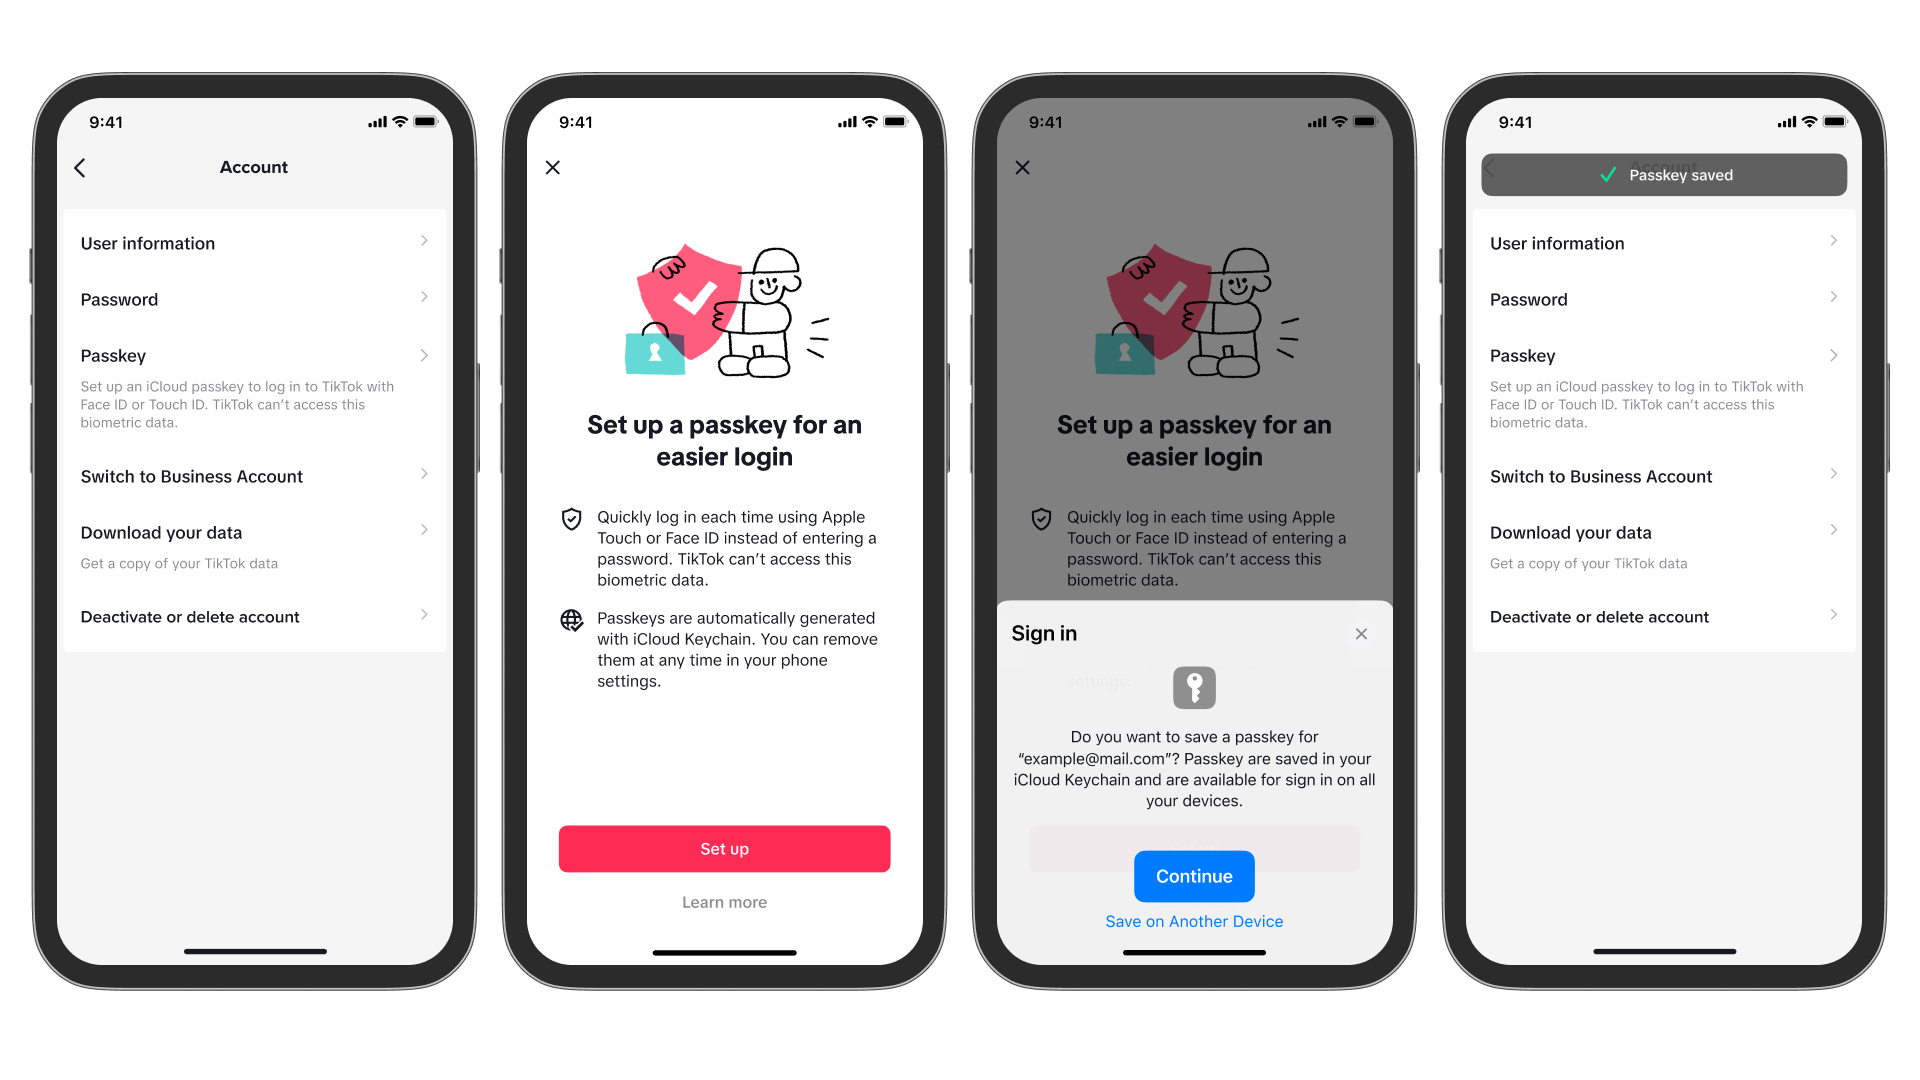 Image Credit–TikTok - TikTok introduces passkey login for iOS users and joins big tech companies into an alliance